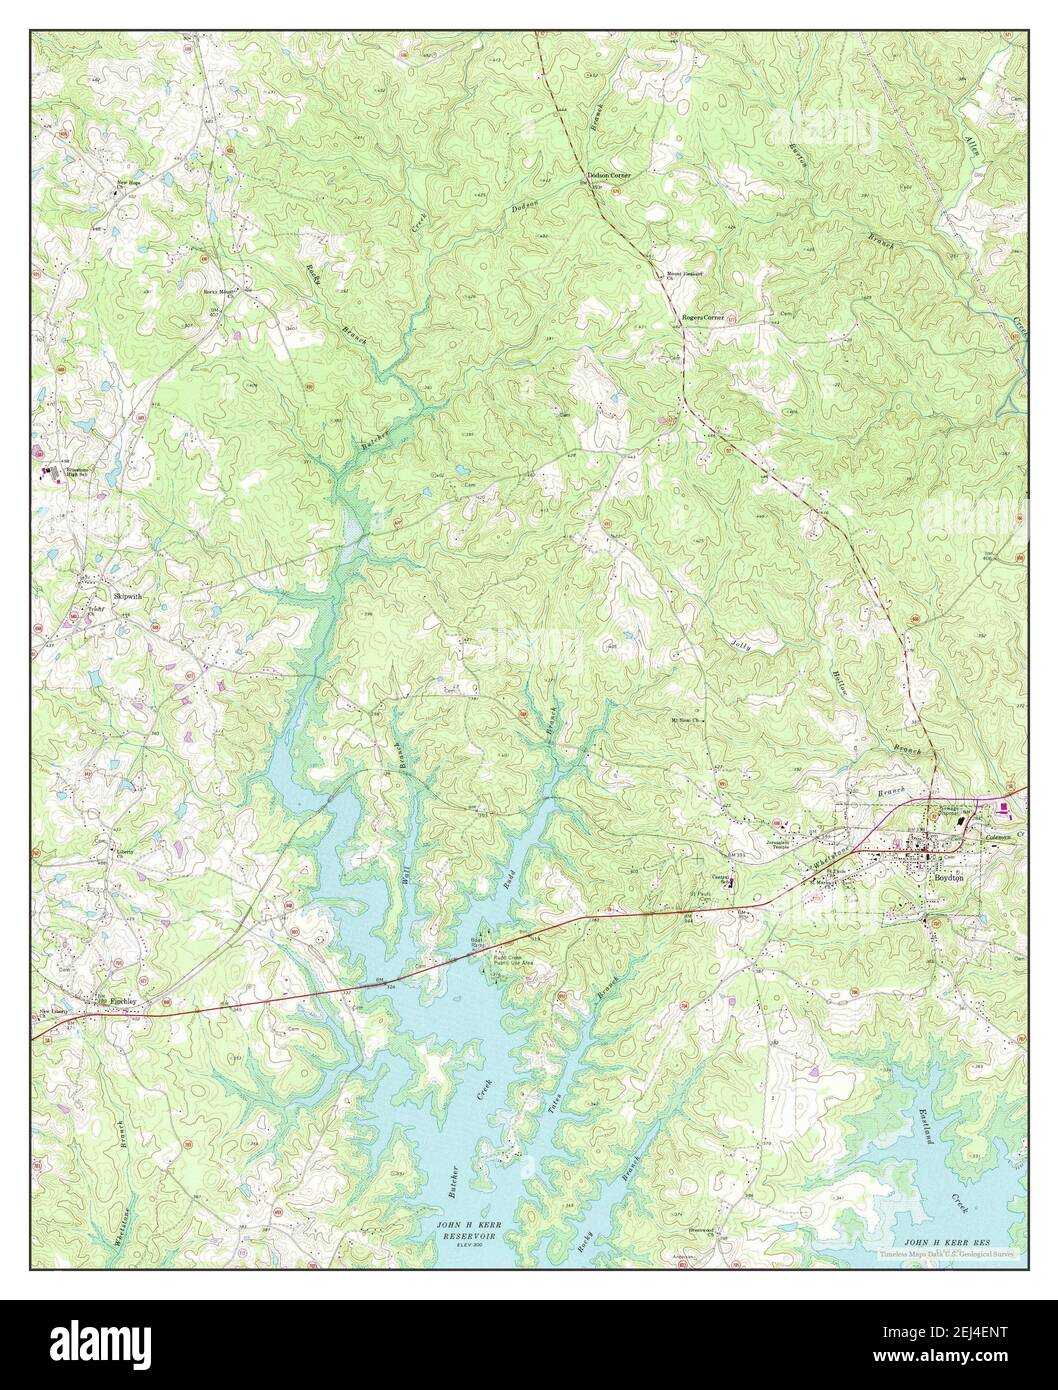 Boydton, Virginia, map 1968, 1:24000, United States of America by Timeless Maps, data U.S. Geological Survey Stock Photo